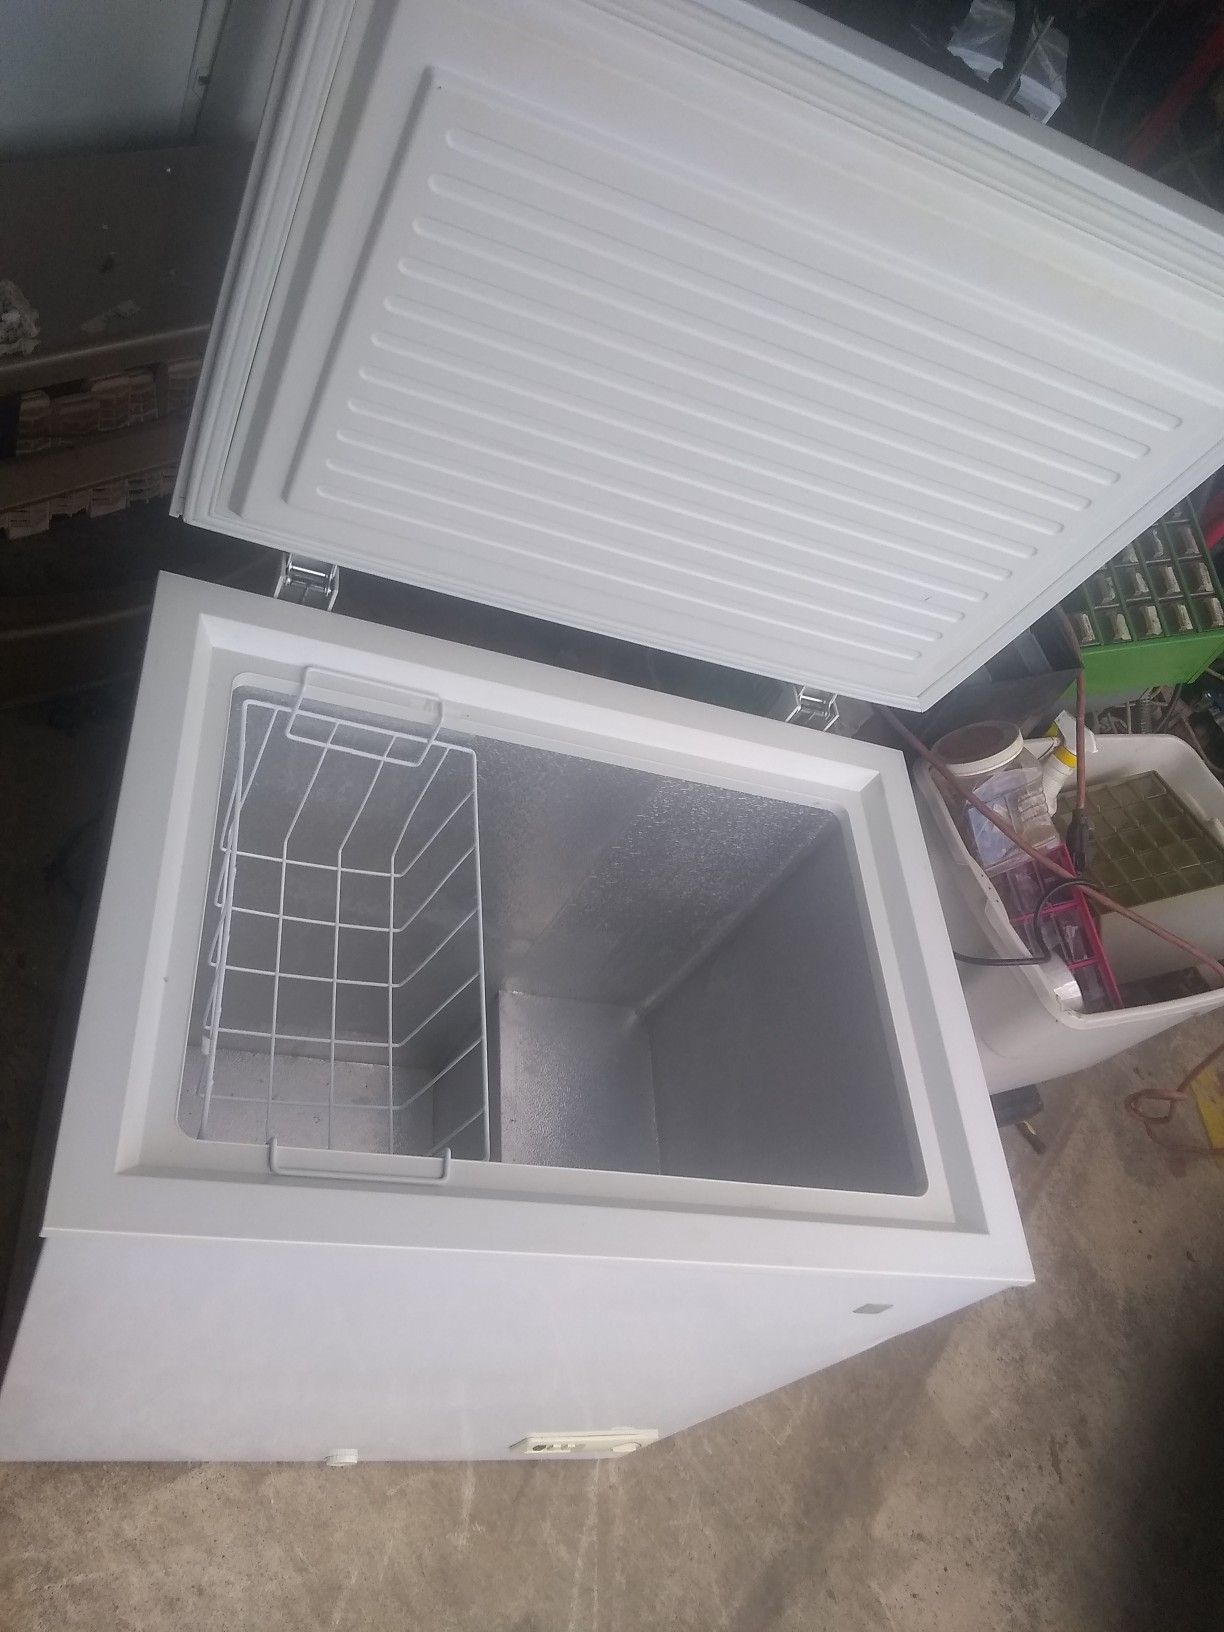 General Electric freezer in perfect working condition